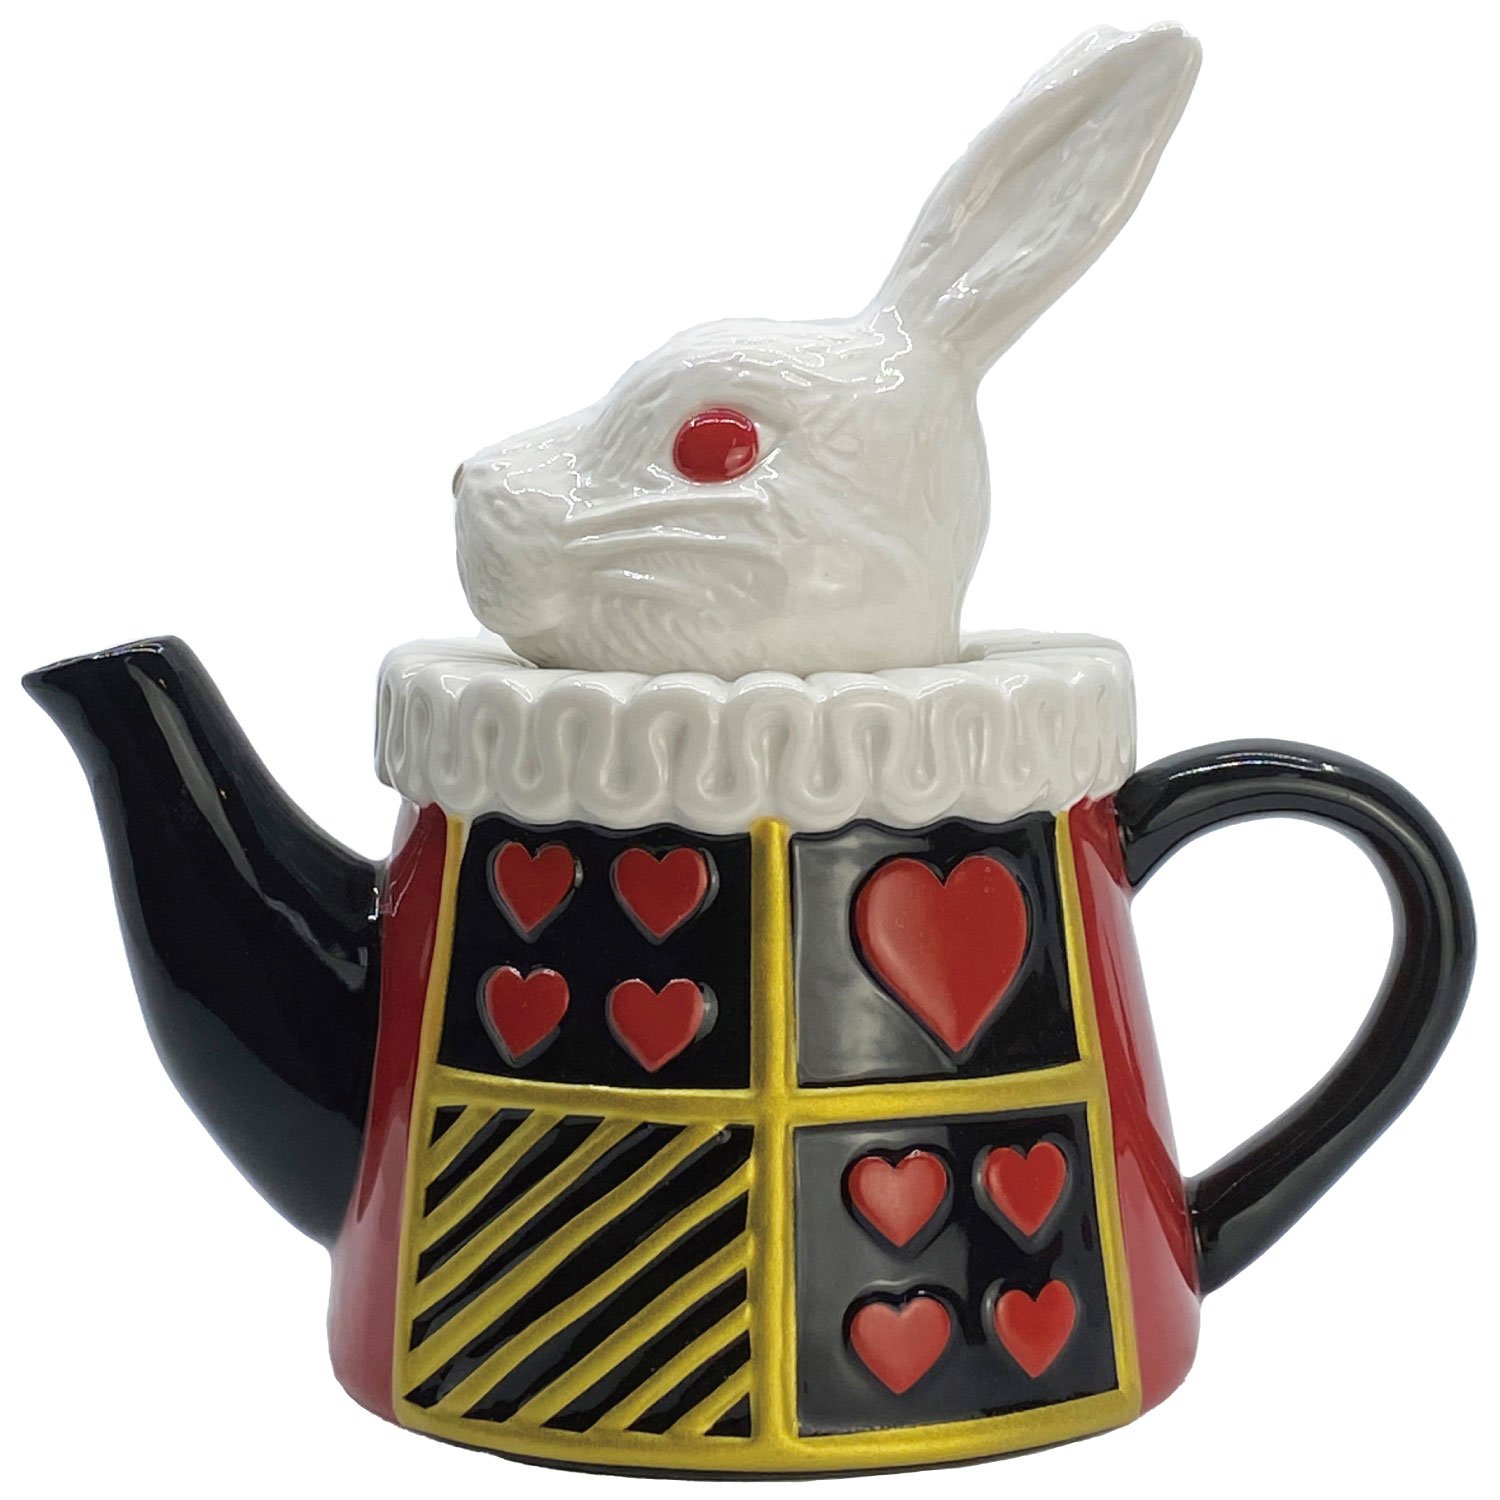 March Hare Teapot